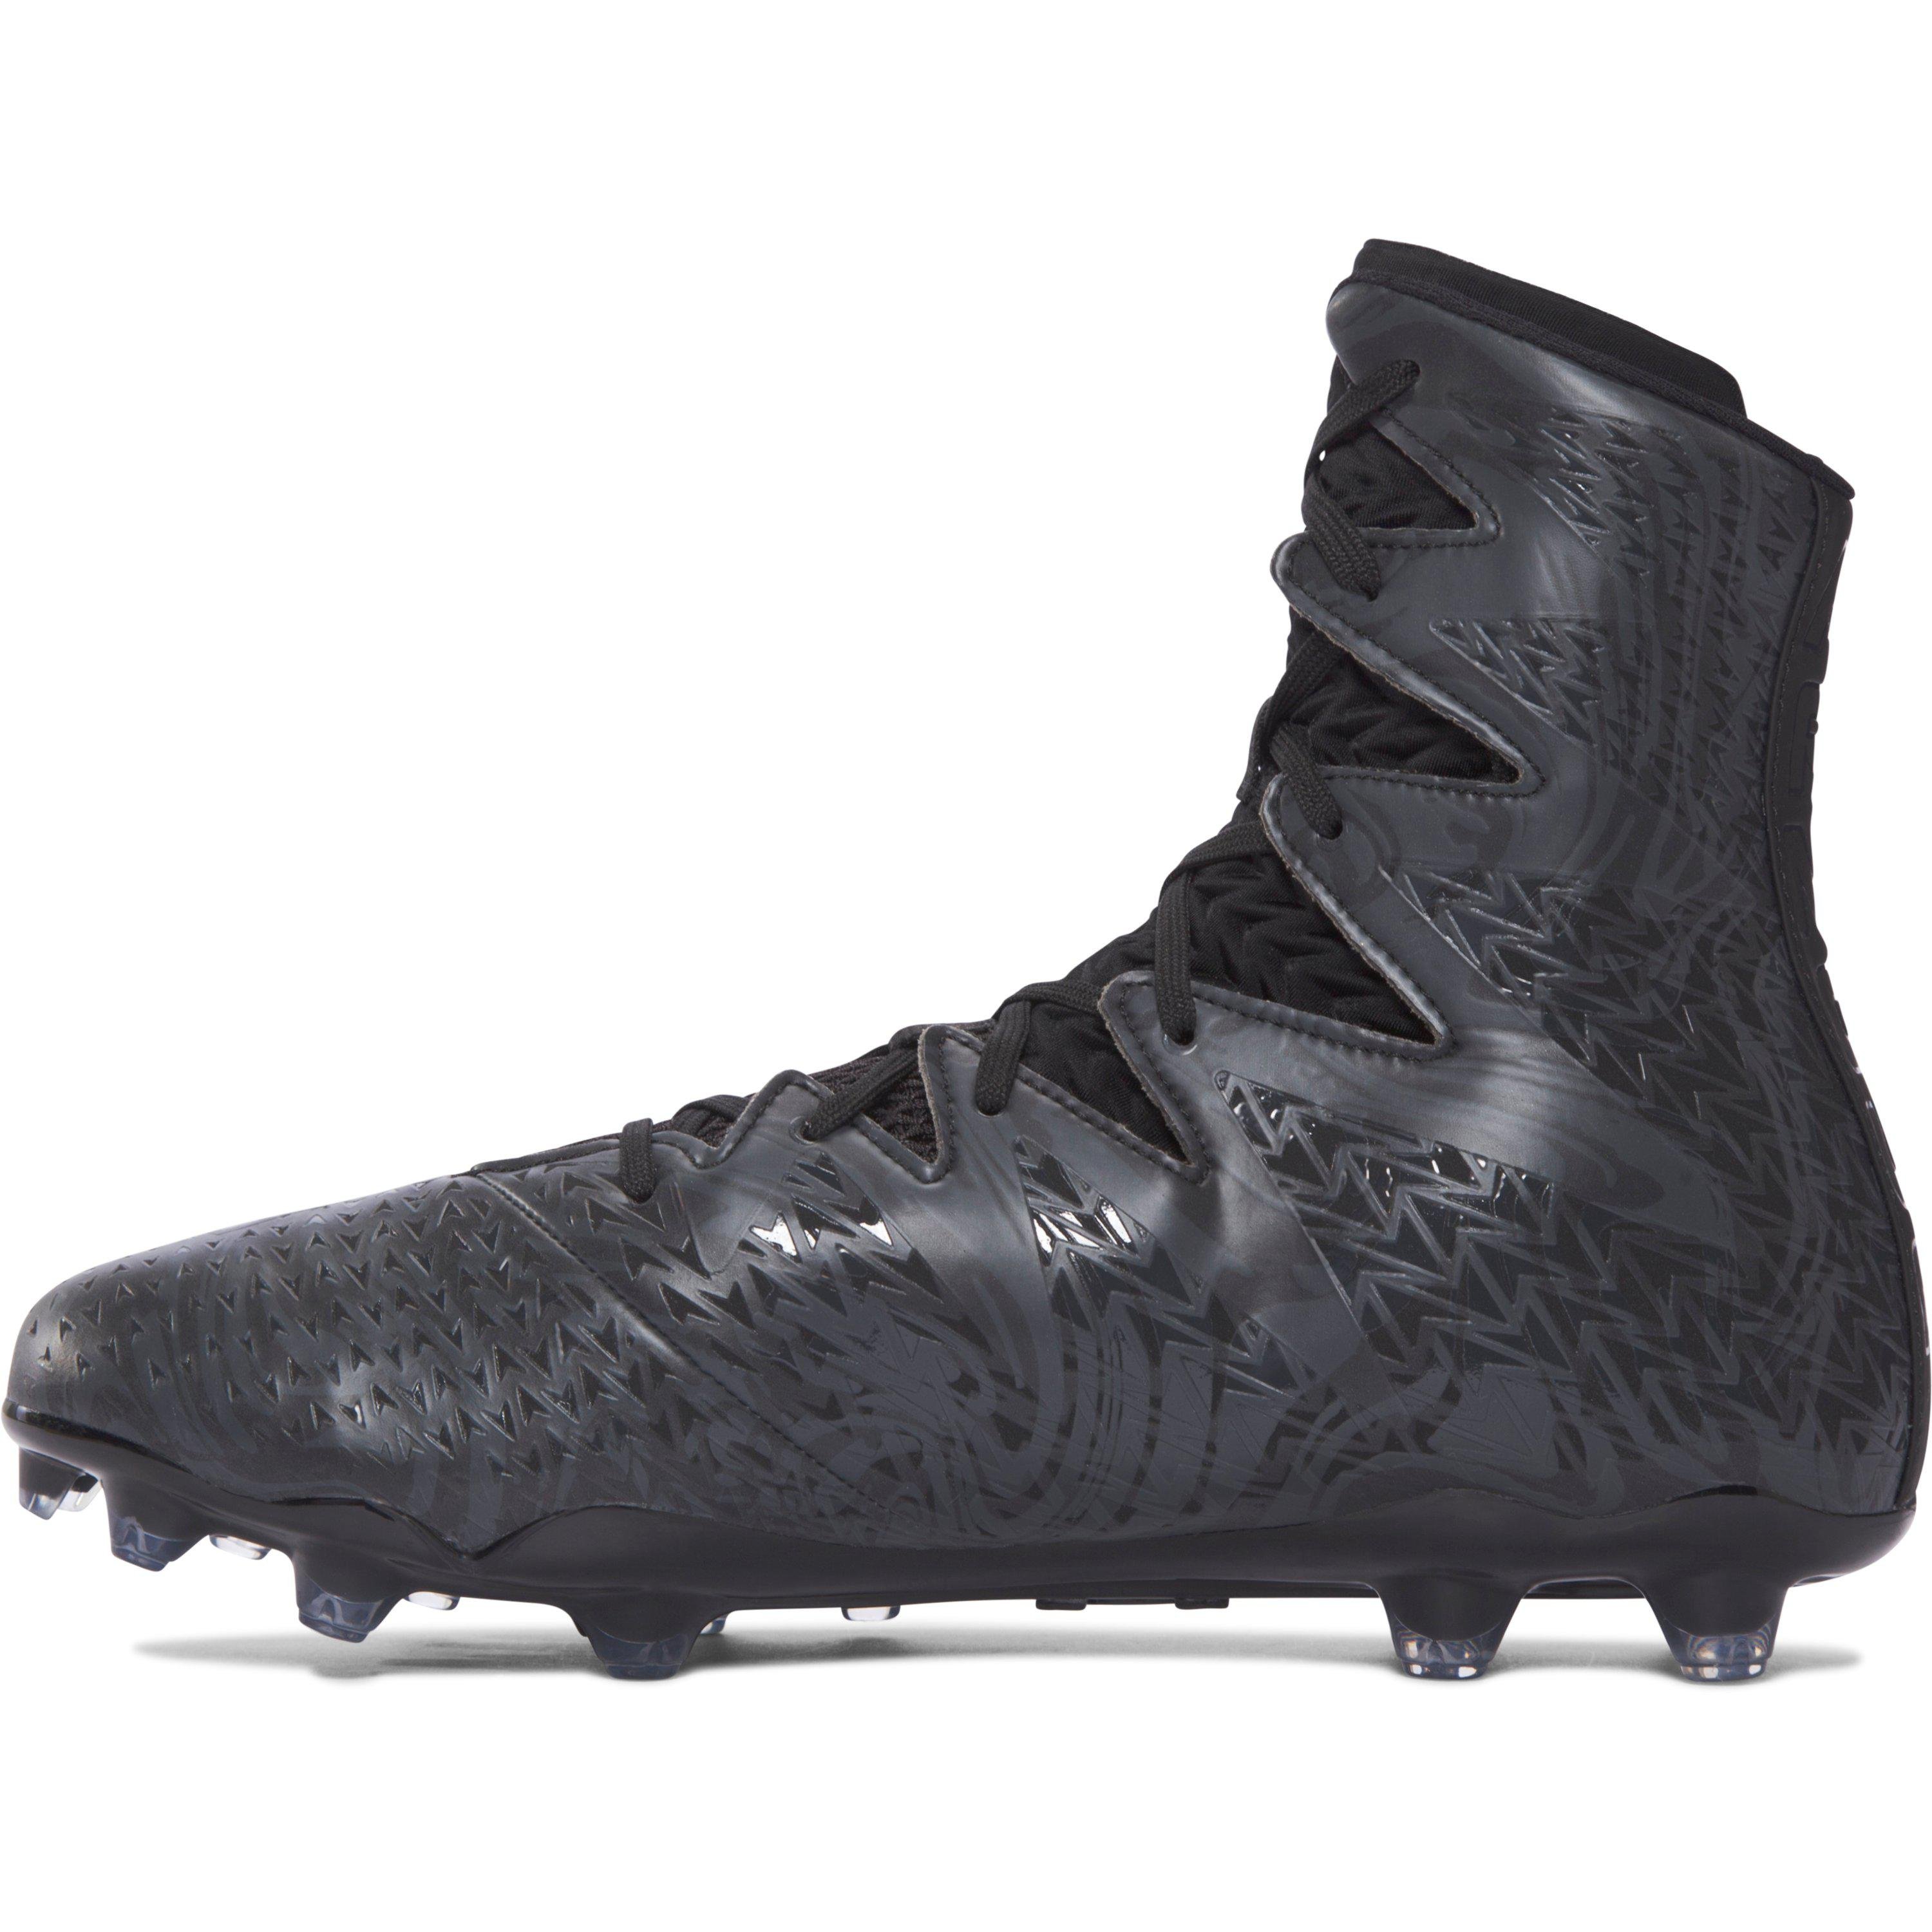 Mens Under Armour High Black High Top Football Cleats Size 15 1287489-001 